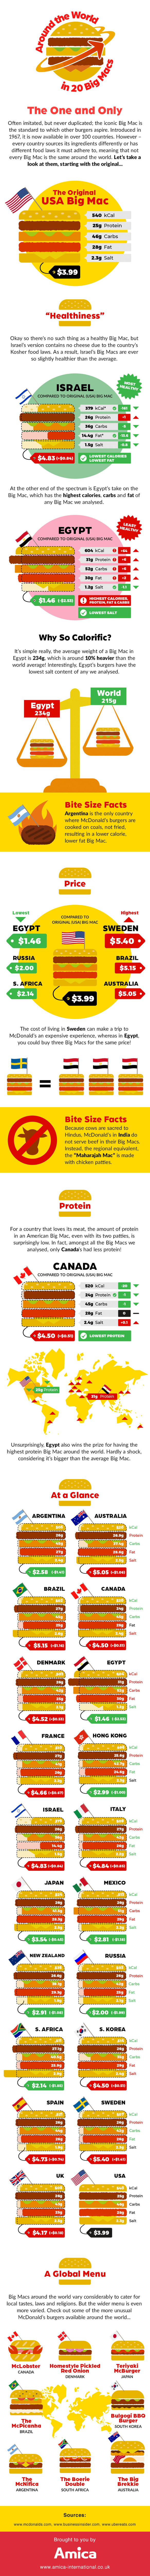 Around The World In 20 Big Macs: Just How Much Do They Vary?